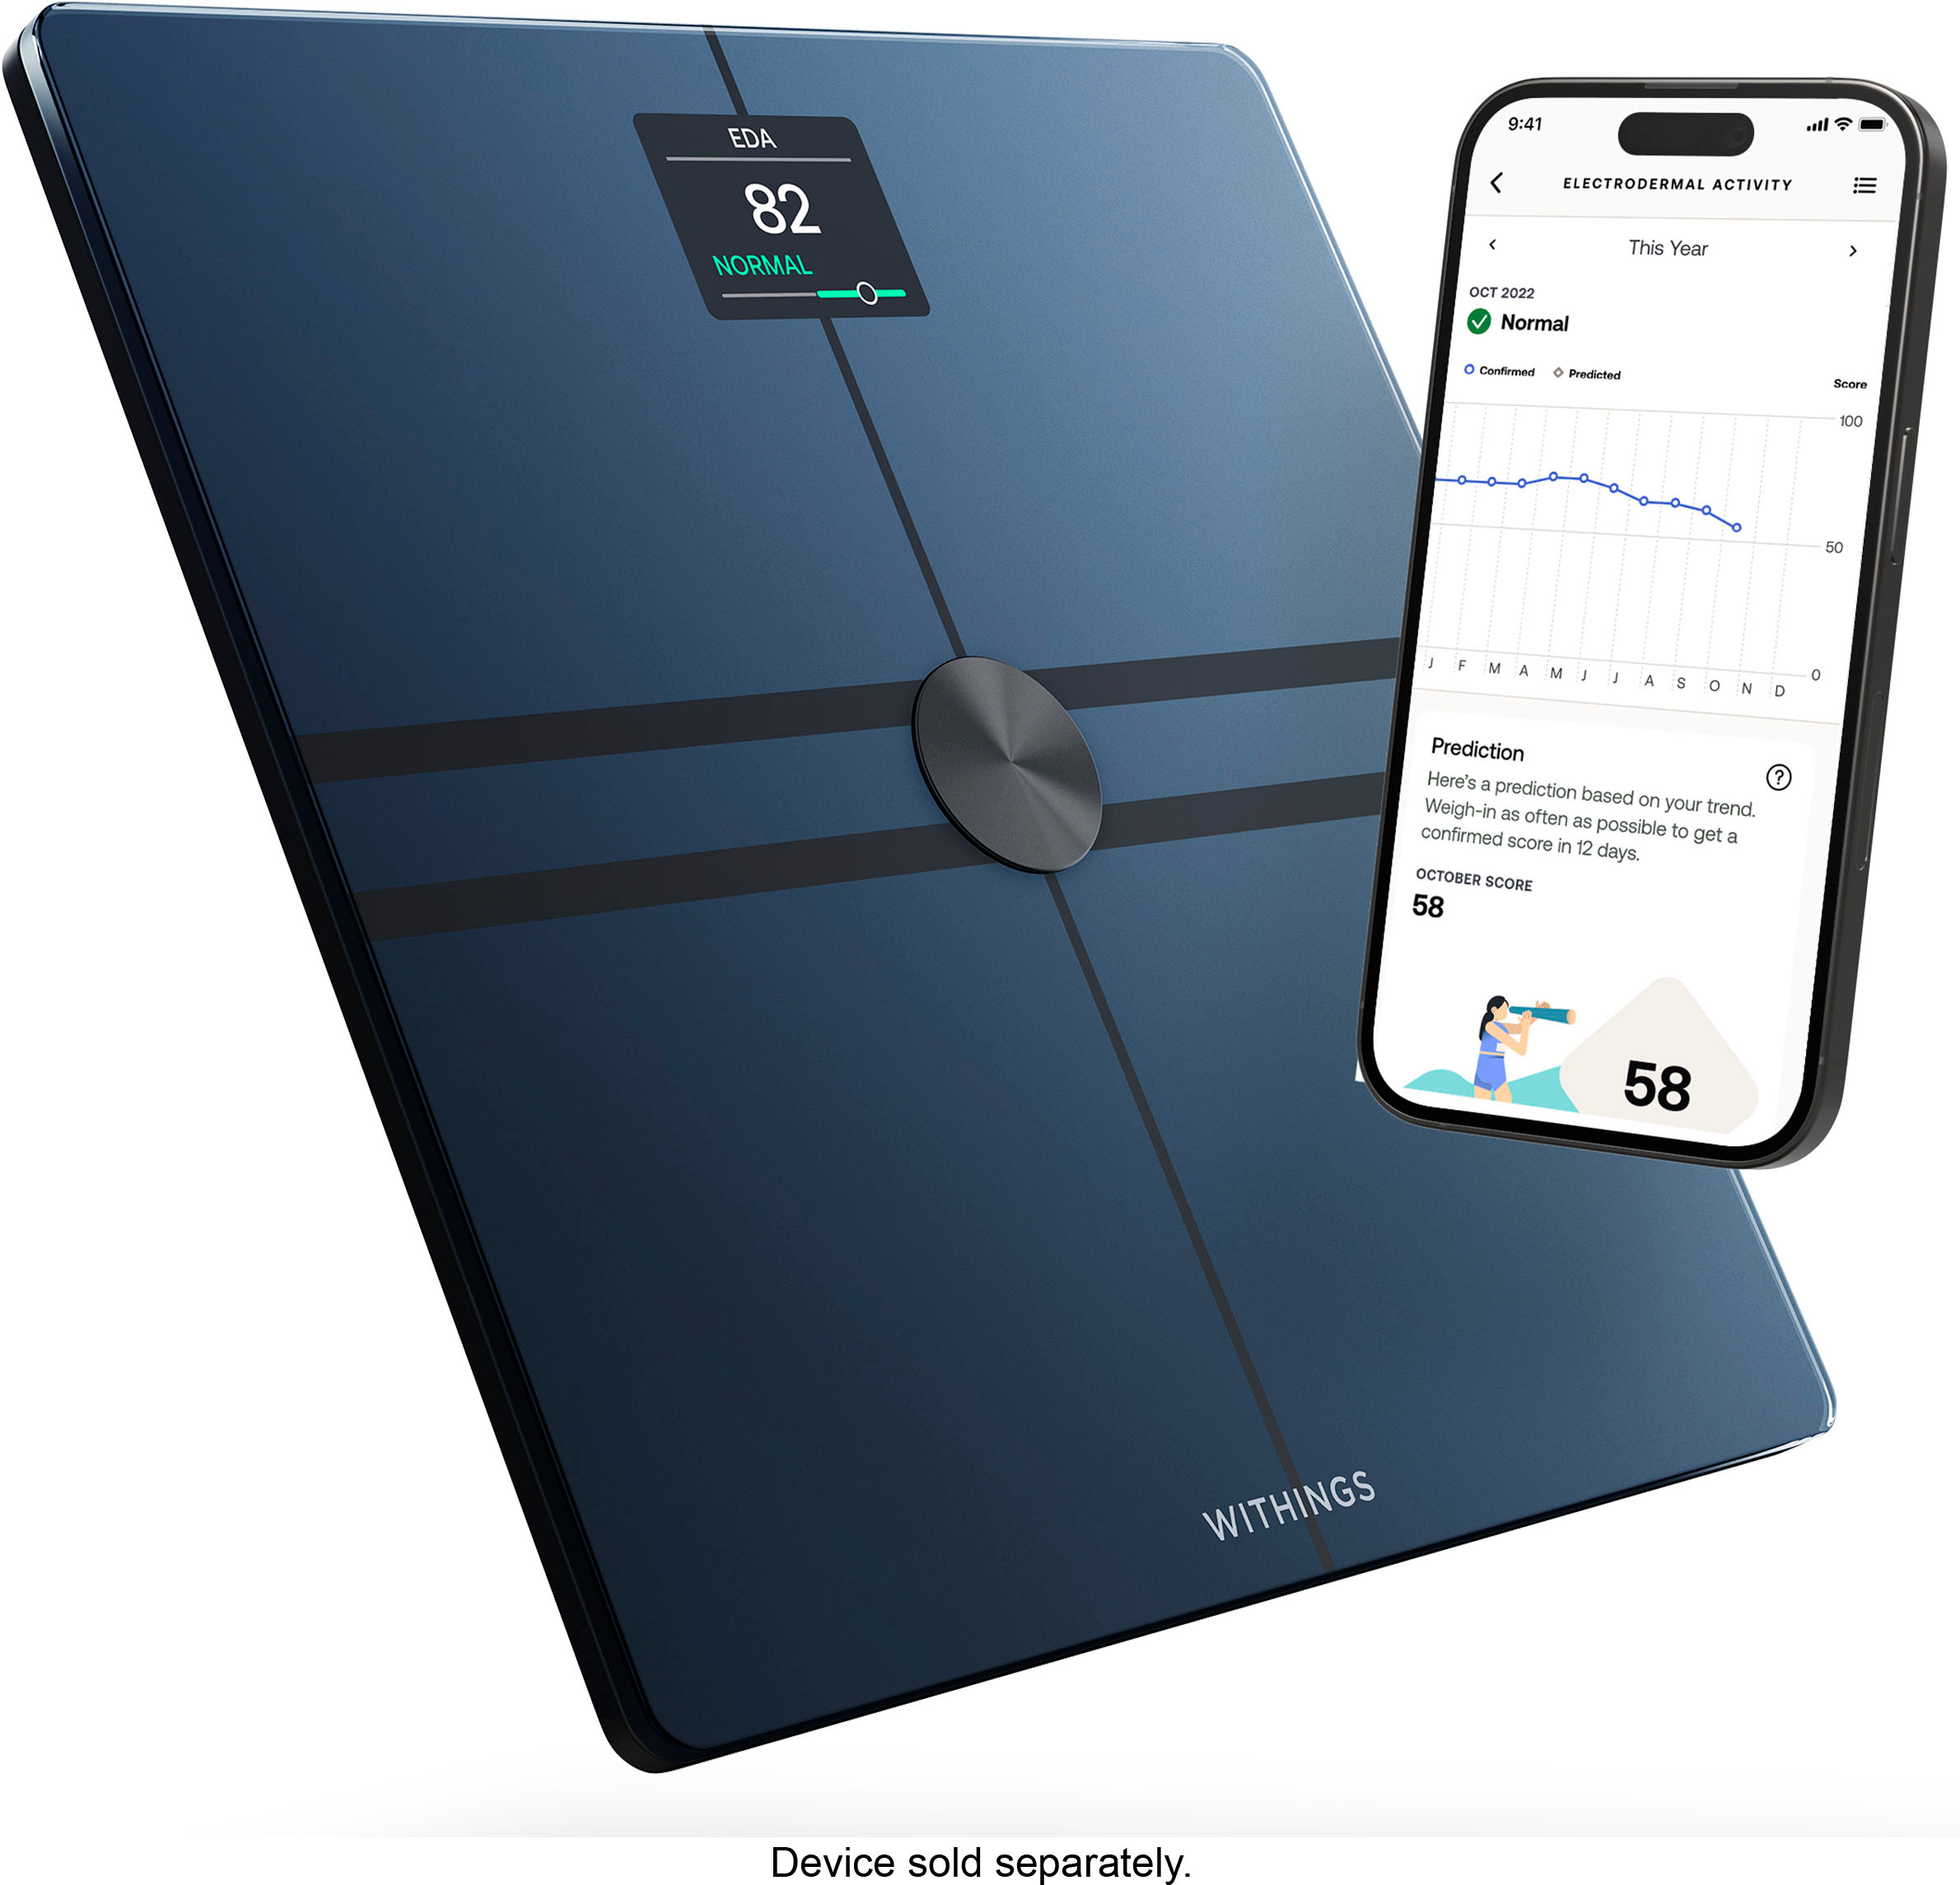 Withings Body Comp Scales - Black